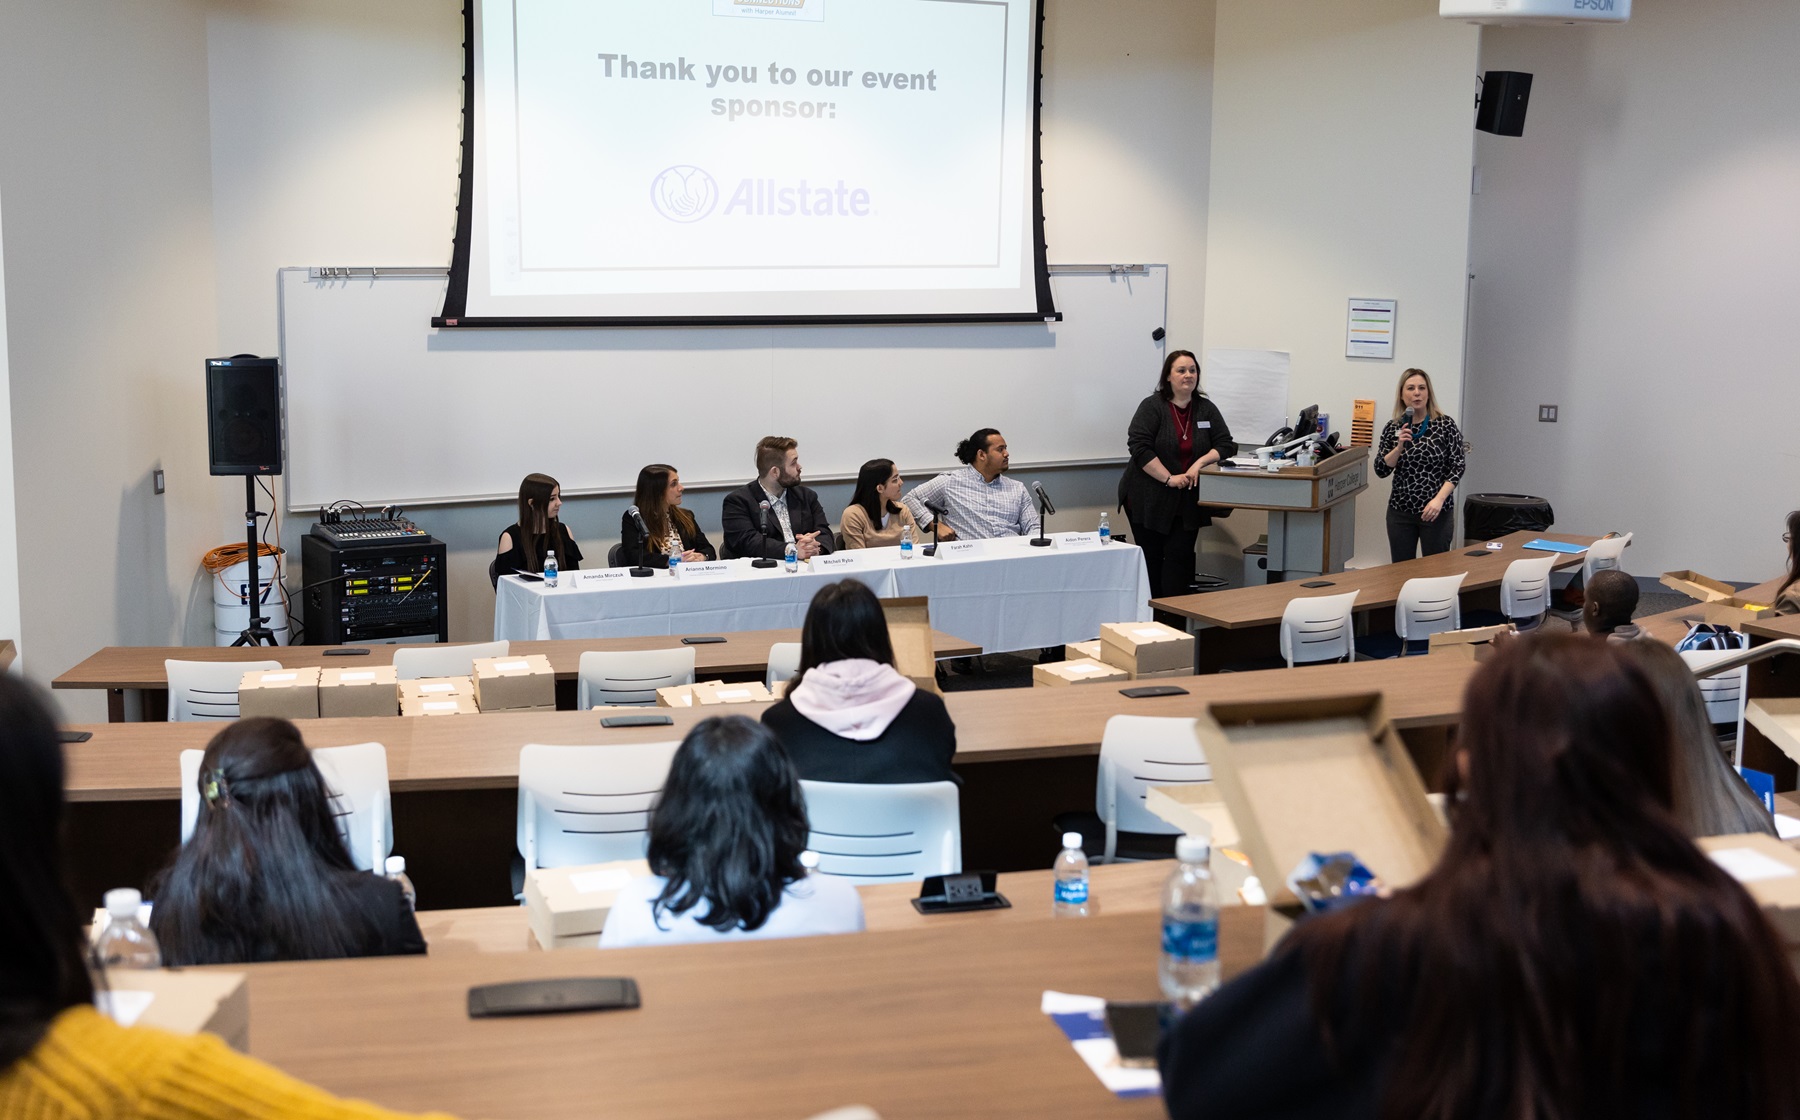 Harper students attend an alumni panel discussion during the Career Connections event.